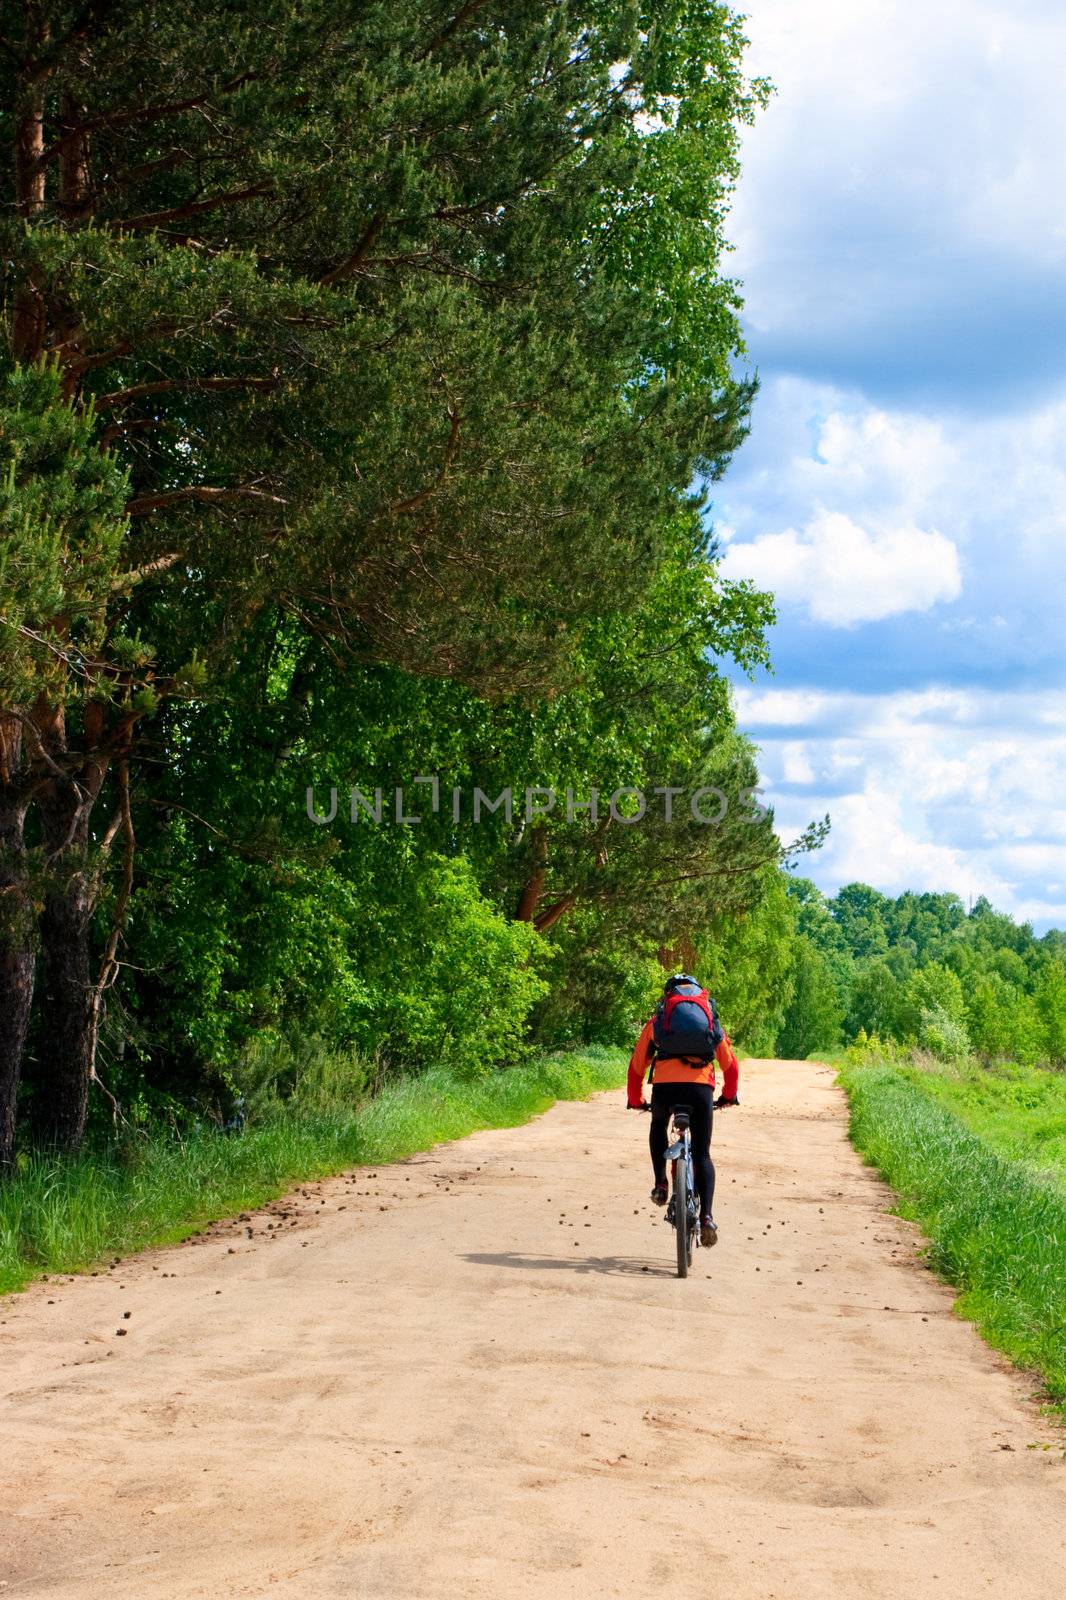 Traveling cyclists on dirt road